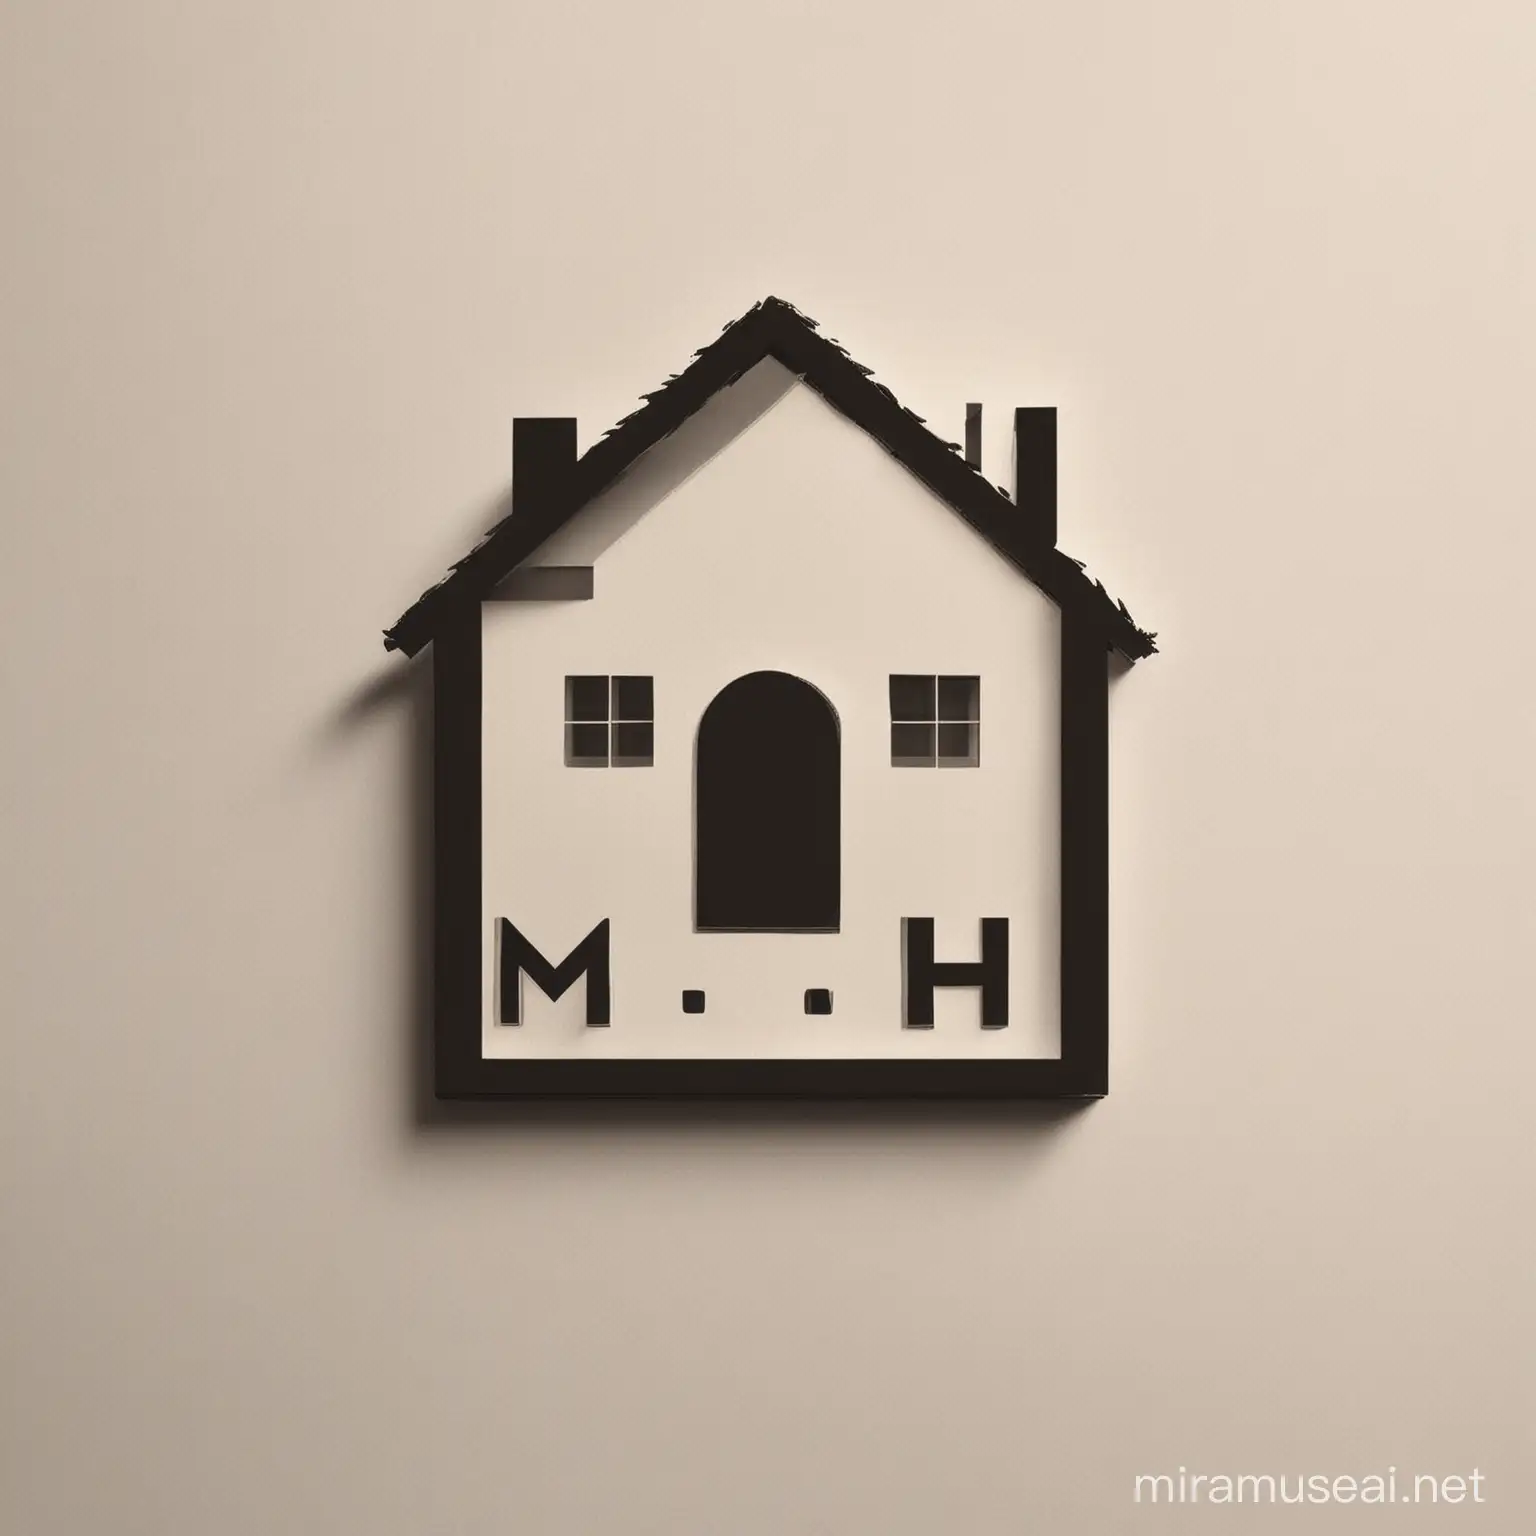 A simple house logo with name: "MH"